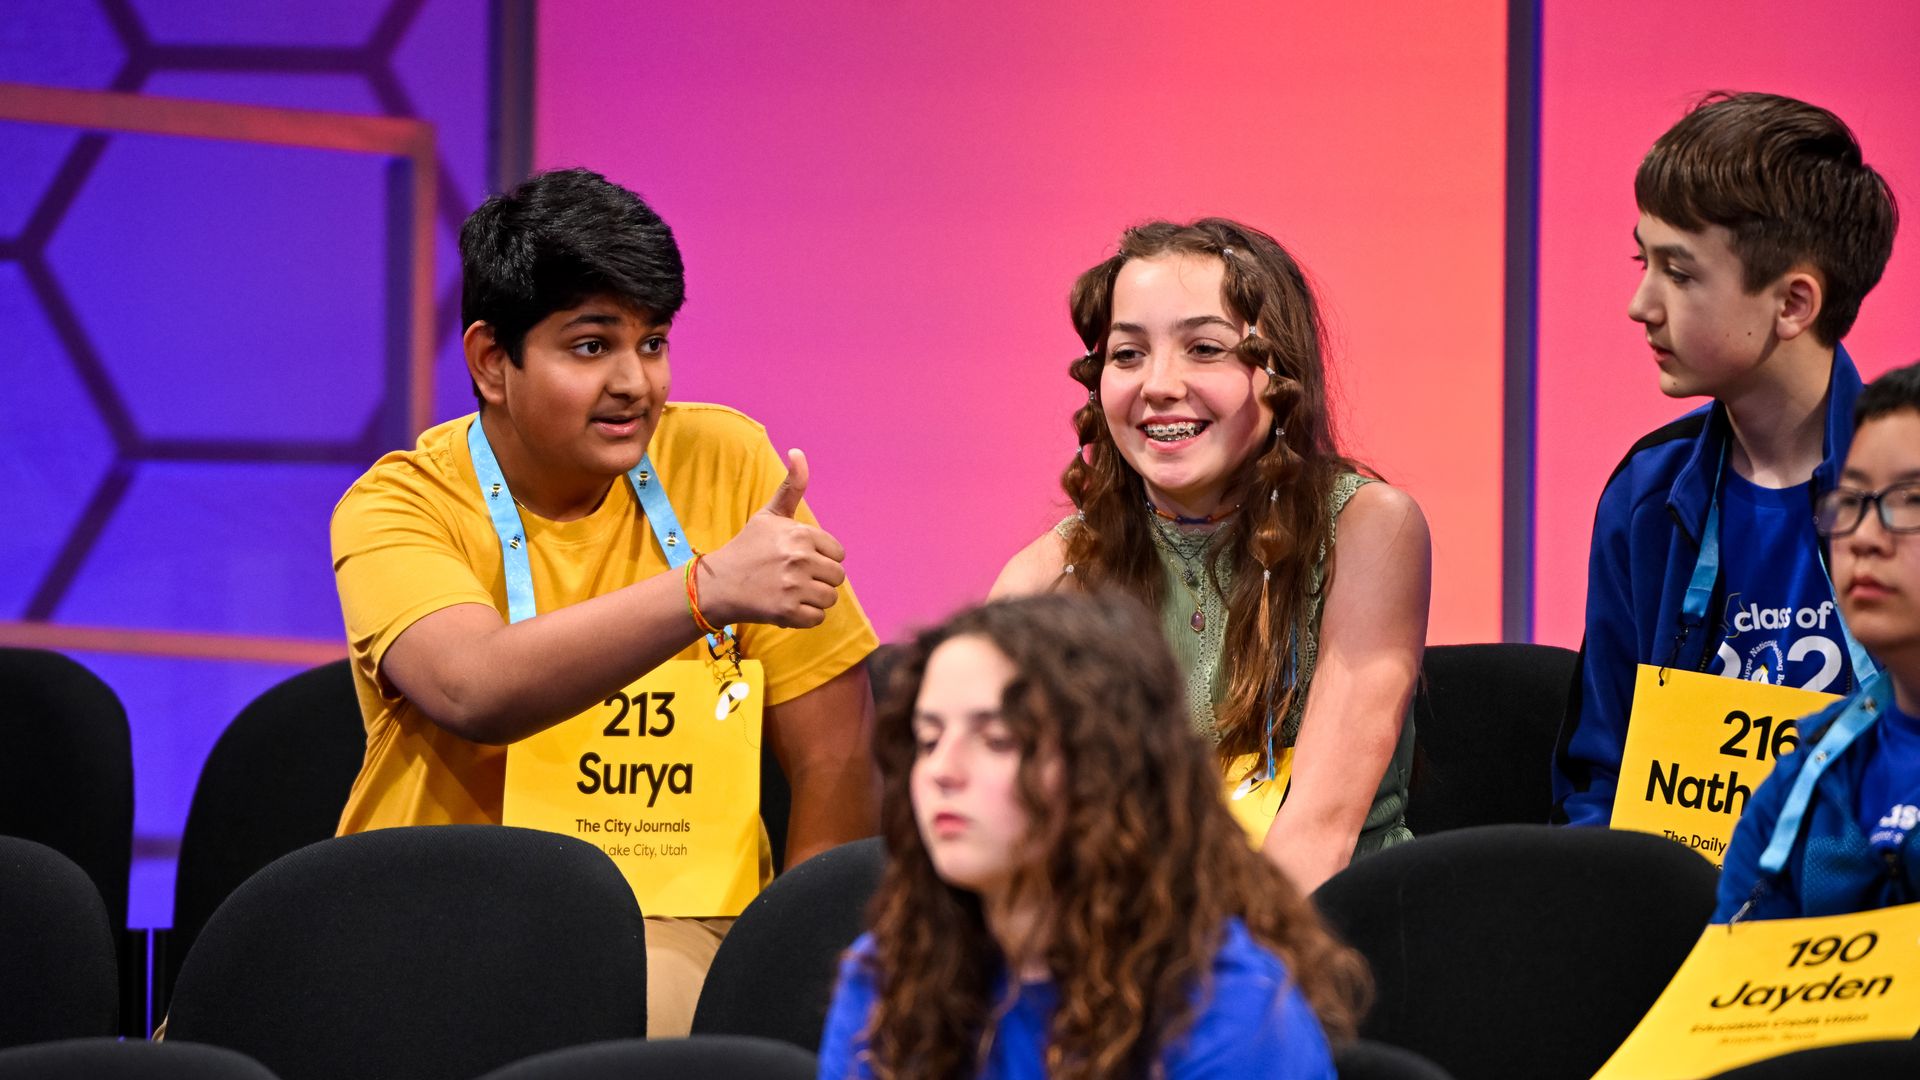 Surya Kapu gives a thumbs up to competitors at the Scripps National Spelling Bee. Photo: E. M. Pio Roda / Scripps National Spelling Bee